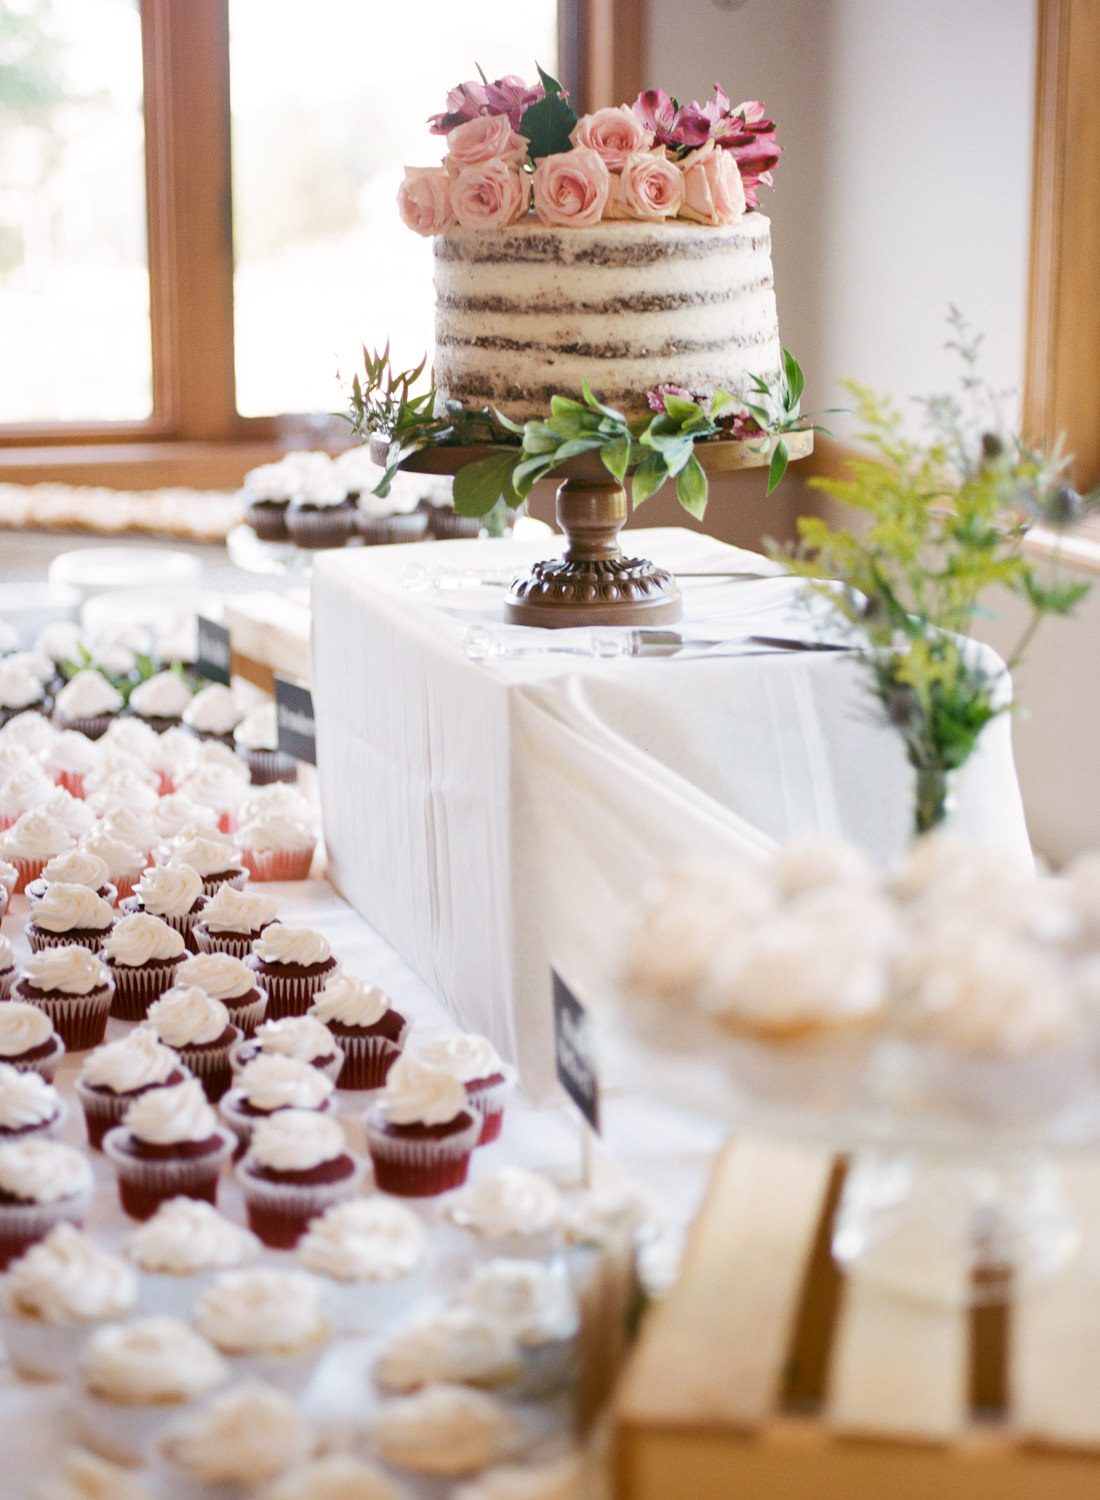 Wedding cake and cupcakes with greenery and pink roses; St. Louis wedding photographer